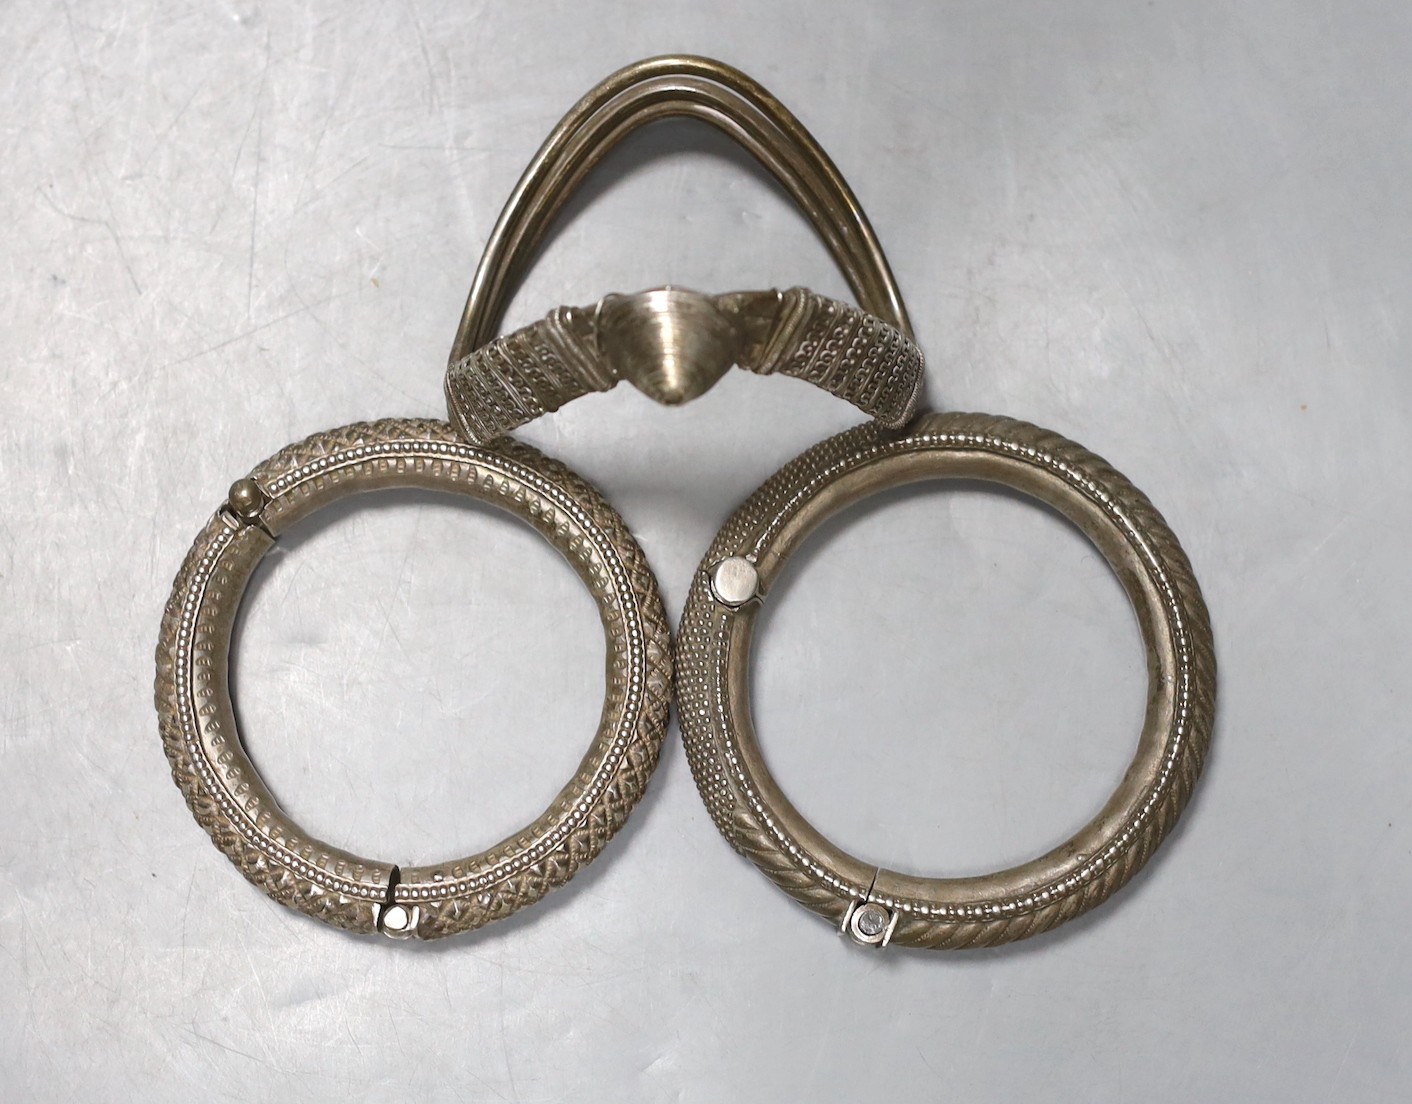 Two 20th century Indian white metal hinged bracelets and a similar shaped bangle.